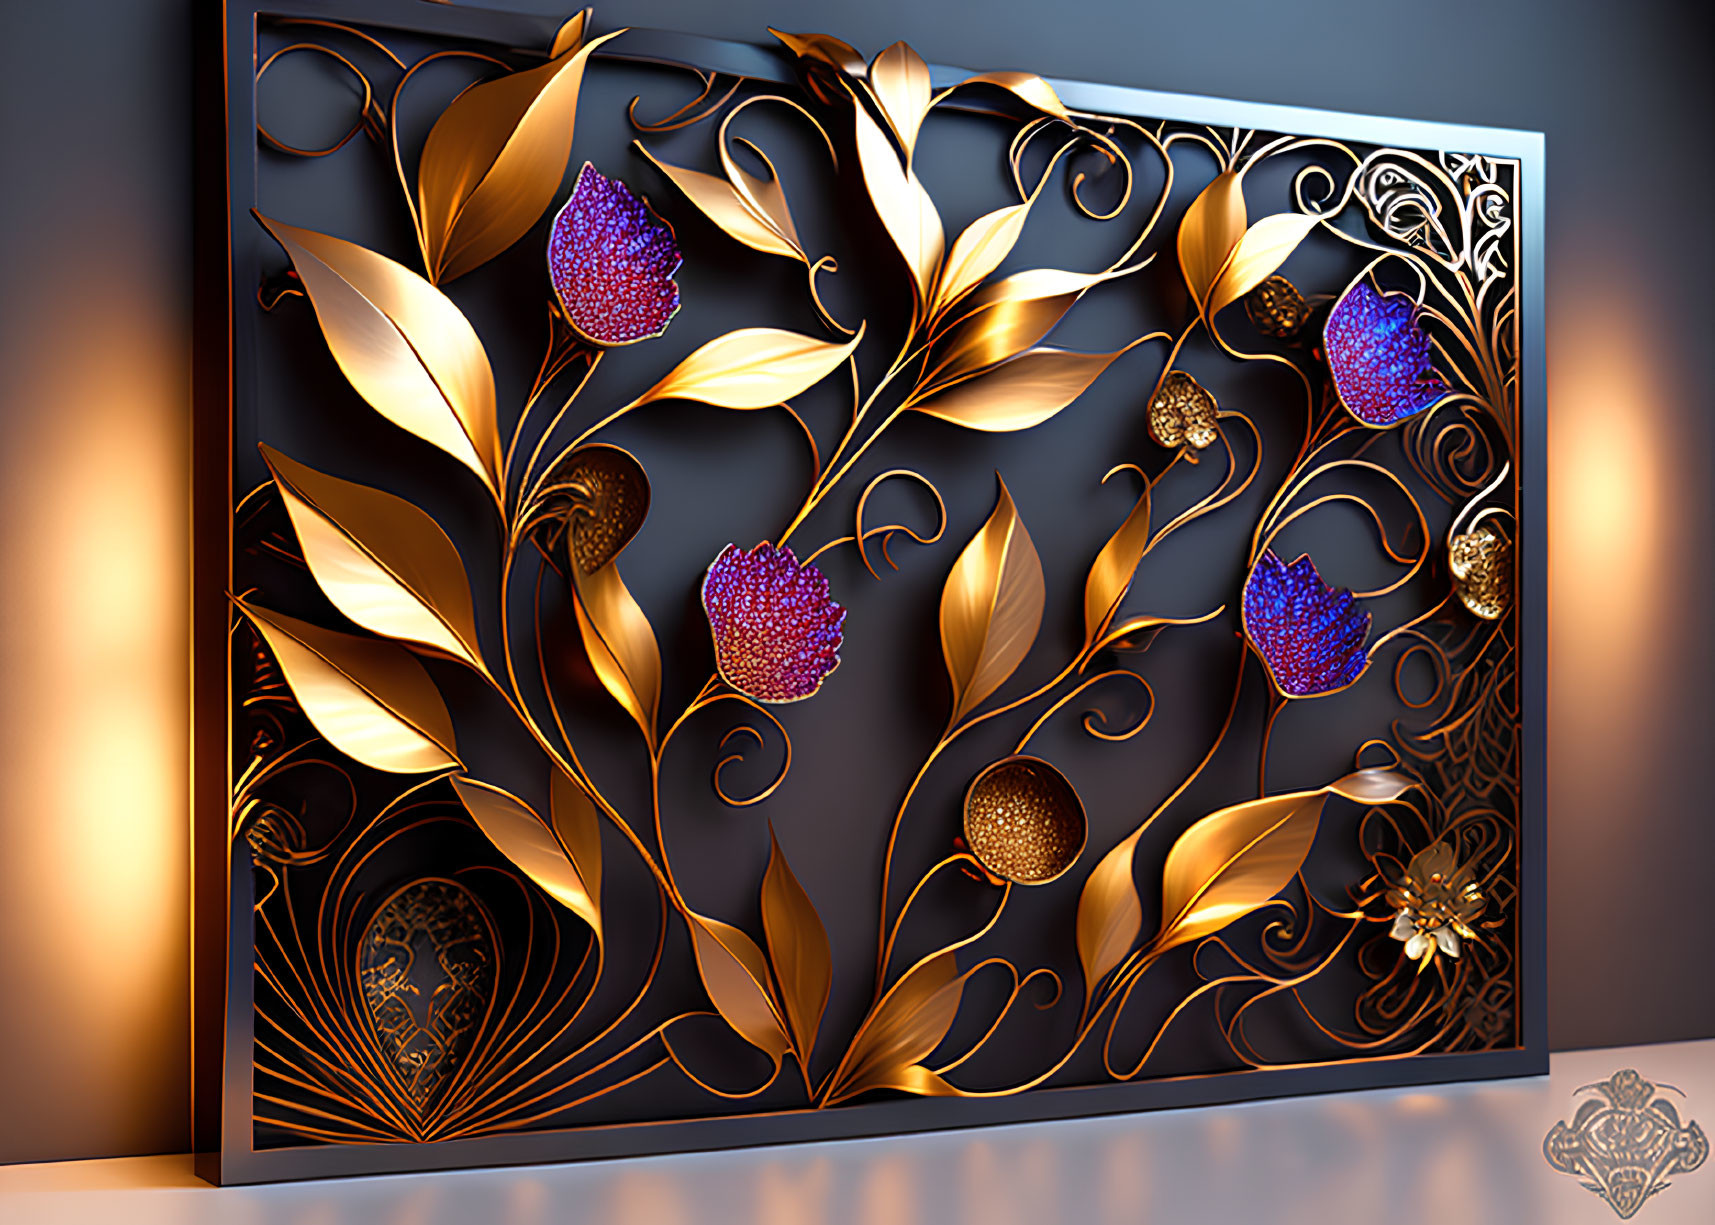 Golden vines, violet flowers in 3D wall art with dramatic lighting